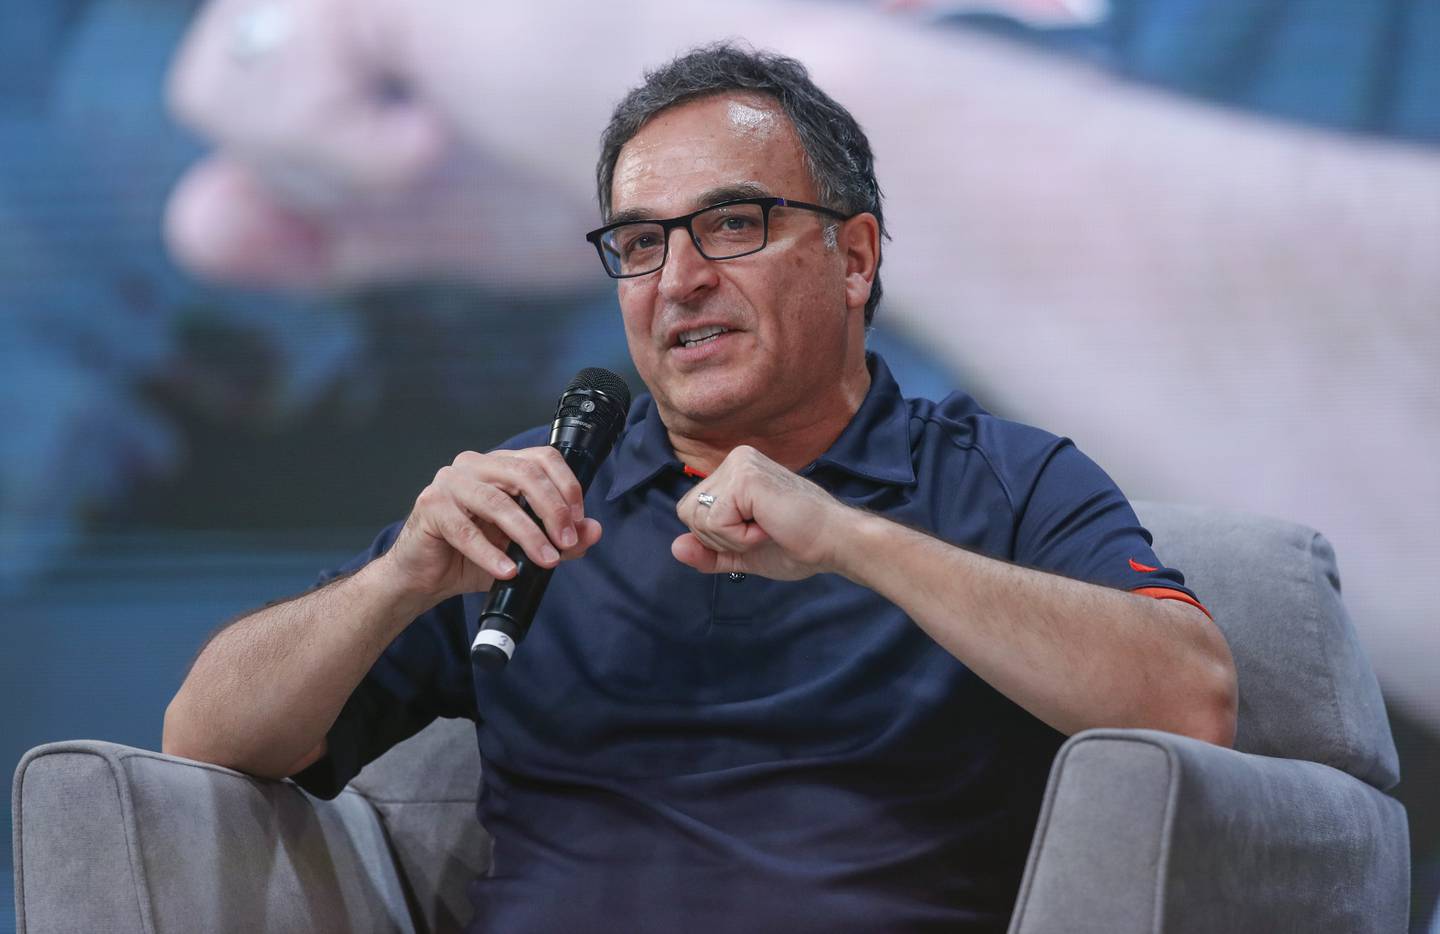 Chicago Bears President and Chief Executive Officer Ted Phillips speaks during on a panel on June 9, 2019.